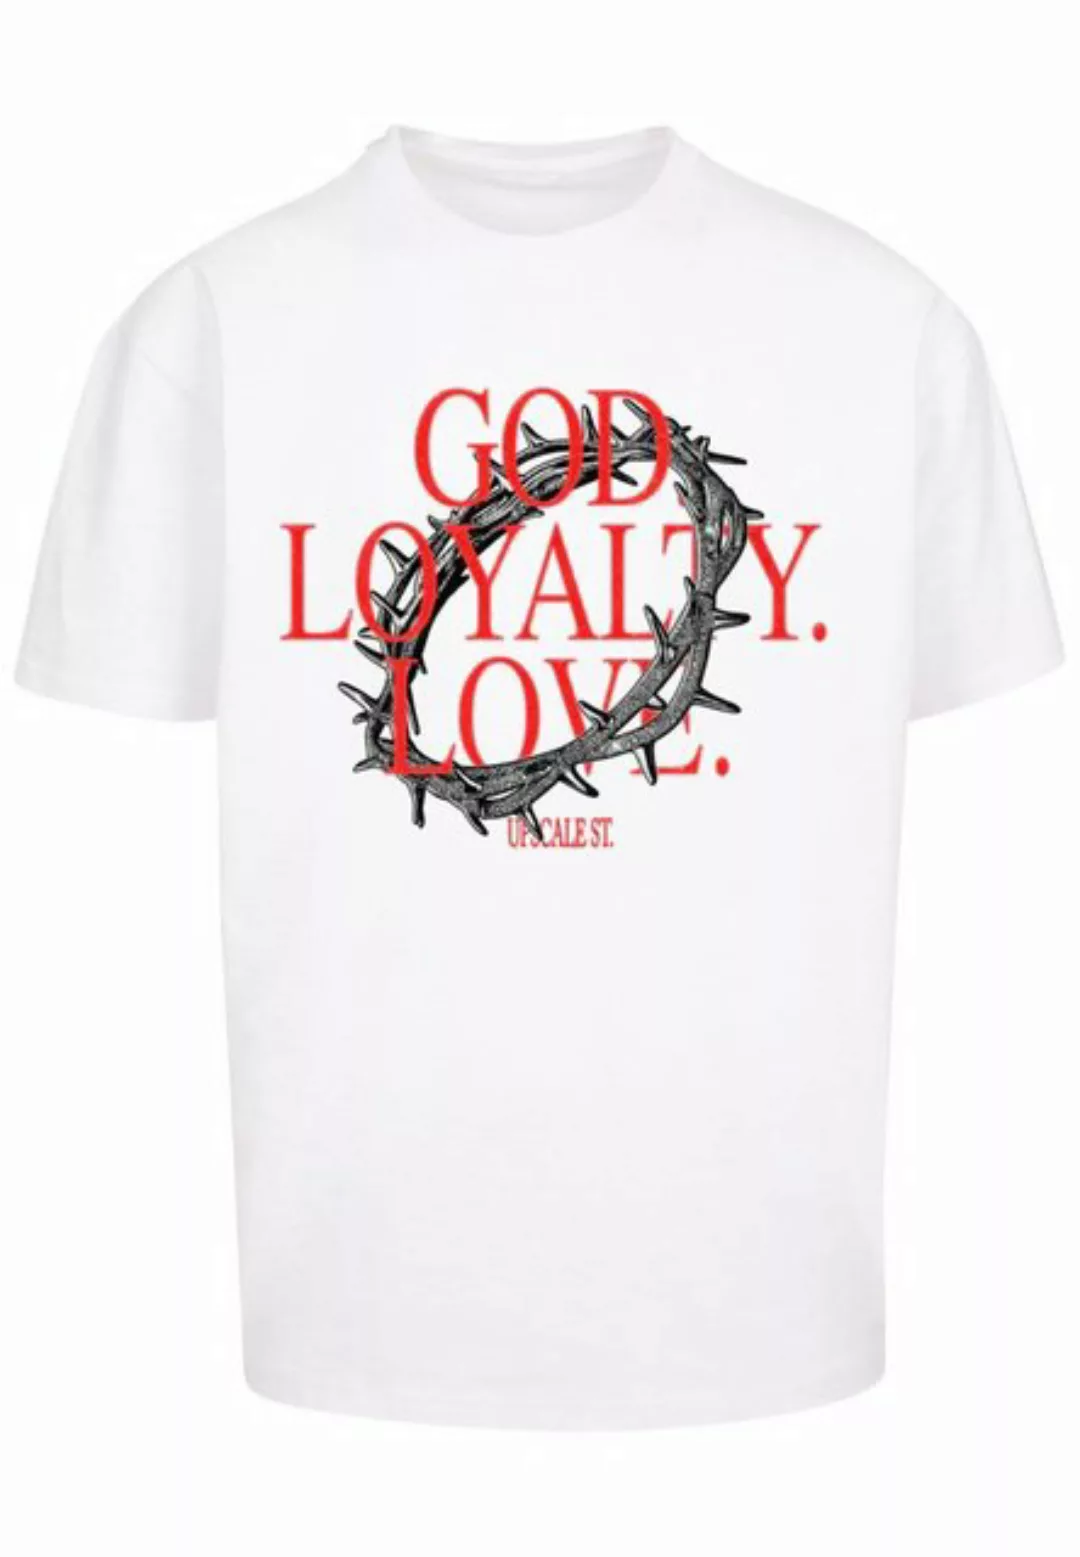 Upscale by Mister Tee T-Shirt Upscale by Mister Tee Unisex God Loyalty Love günstig online kaufen